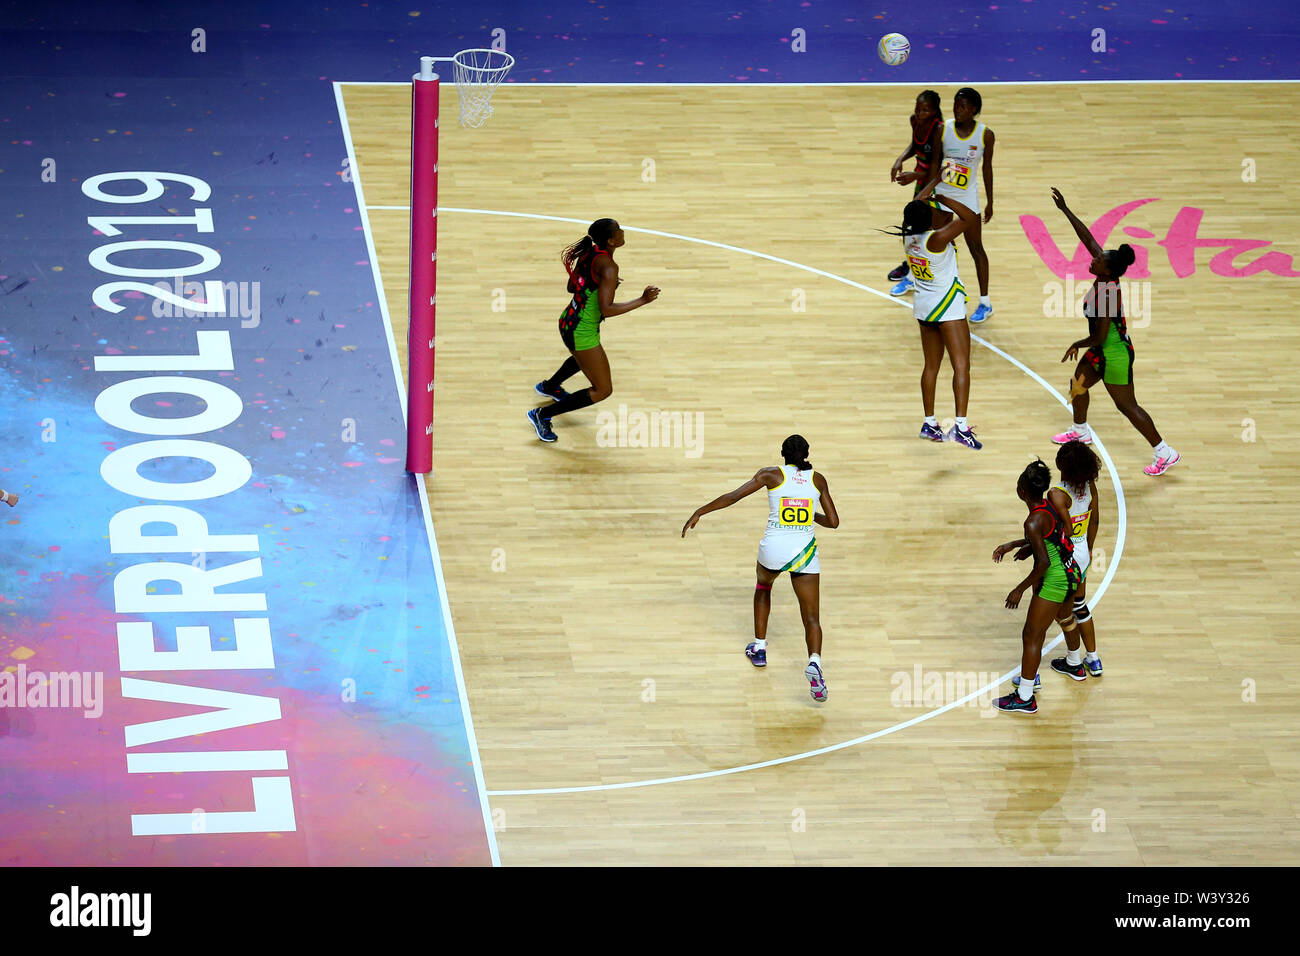 General view of match action between Zimbabwe and Malawi during the netball World Cup match at the M&S Bank Arena, Liverpool. Stock Photo